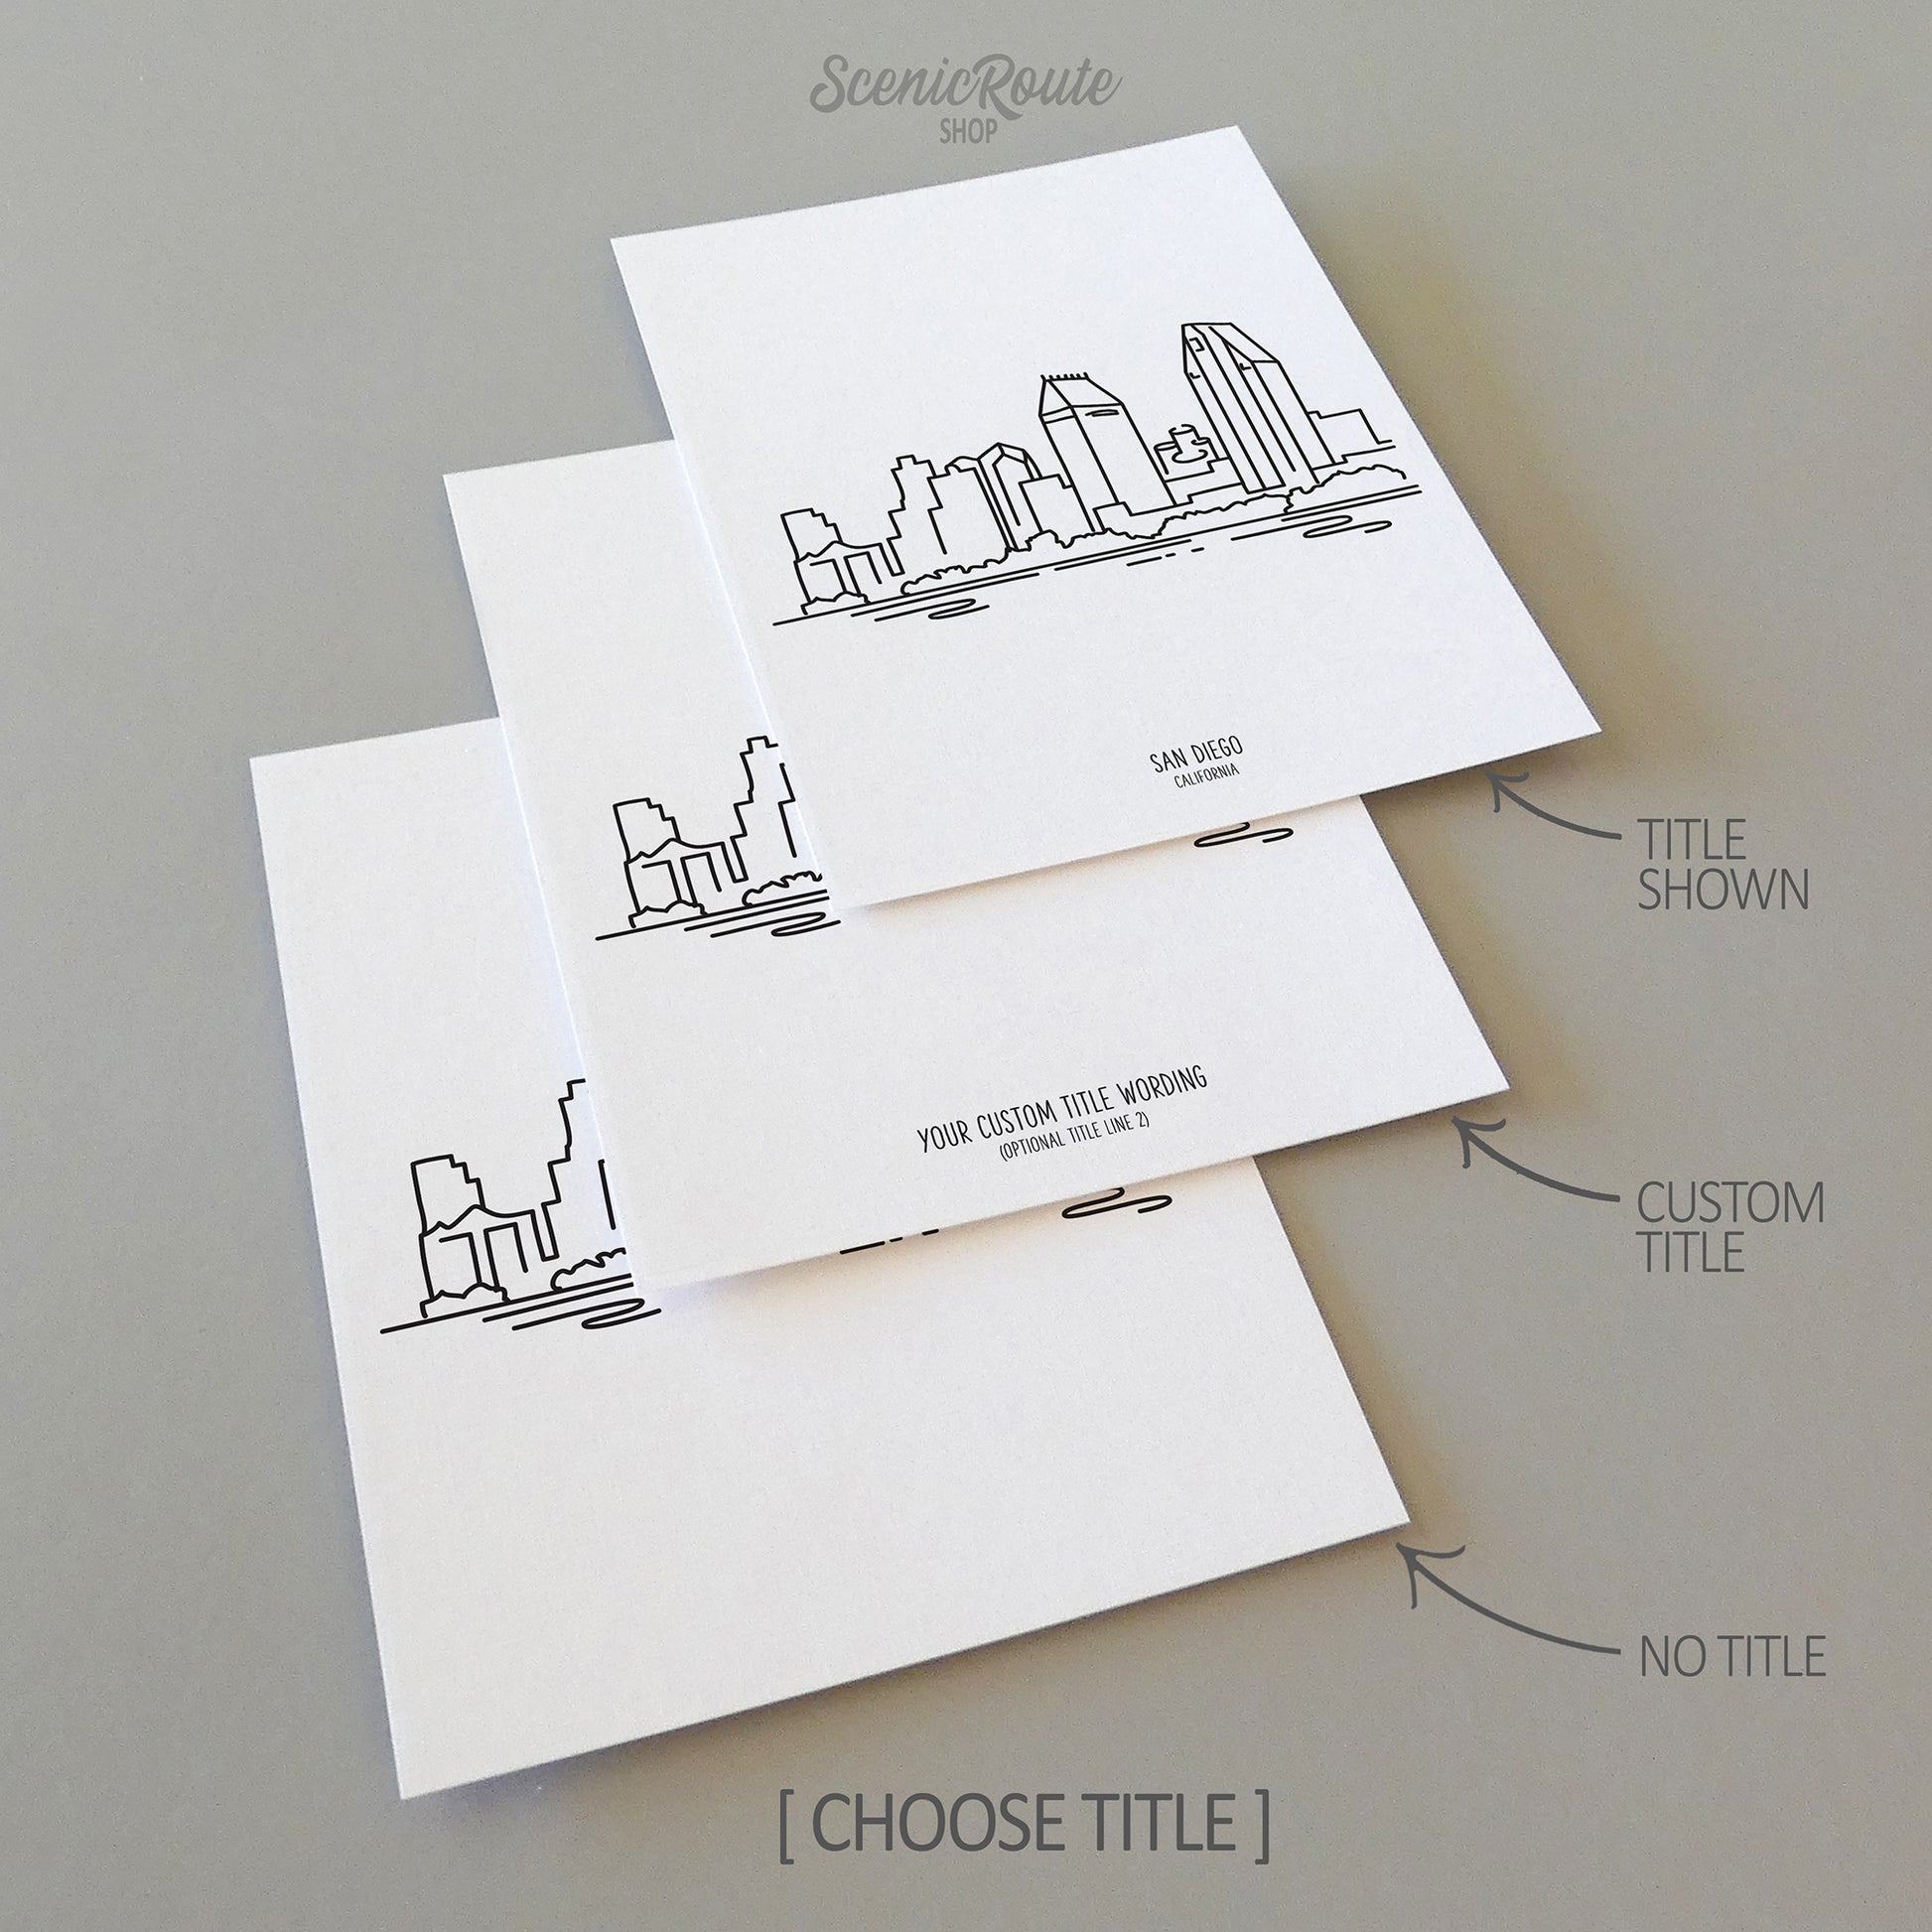 Three line art drawings of the San Diego California Skyline on white linen paper with a gray background. The pieces are shown with title options that can be chosen and personalized.